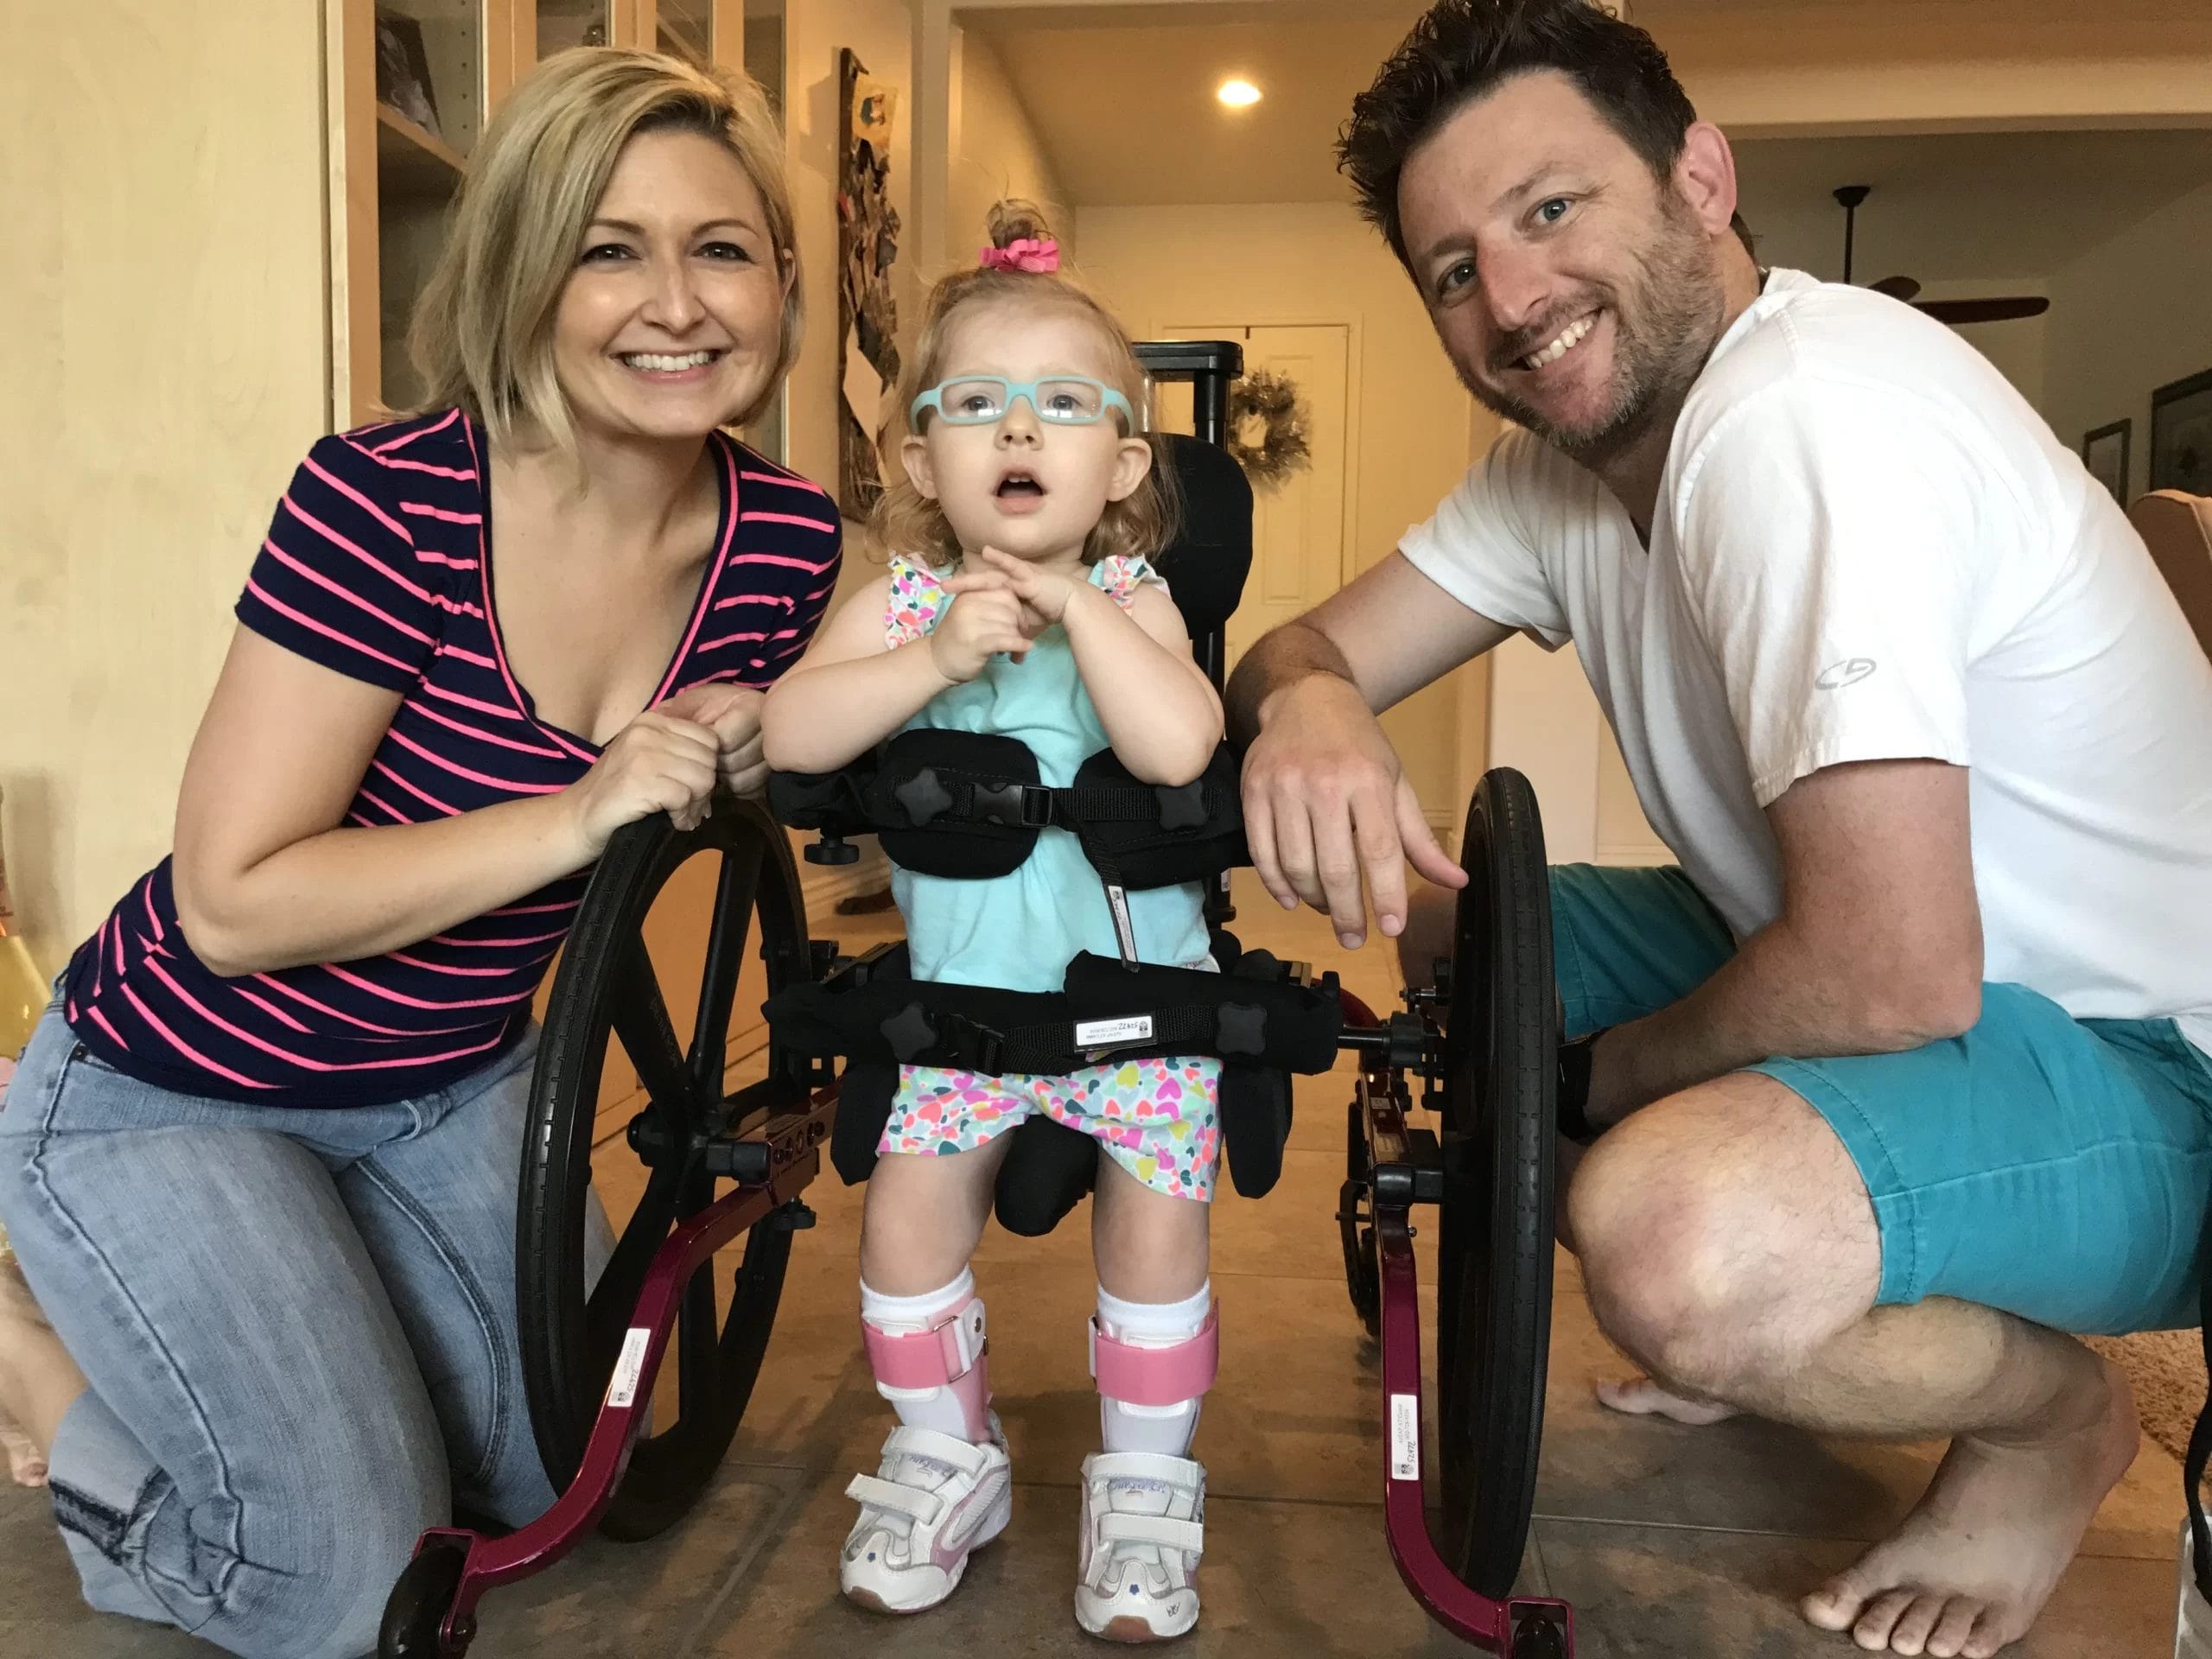 A little girl with cerebral palsy of Arizona poses for a photo with a man and woman, emphasizing the importance of pediatric therapy in home and community based services.